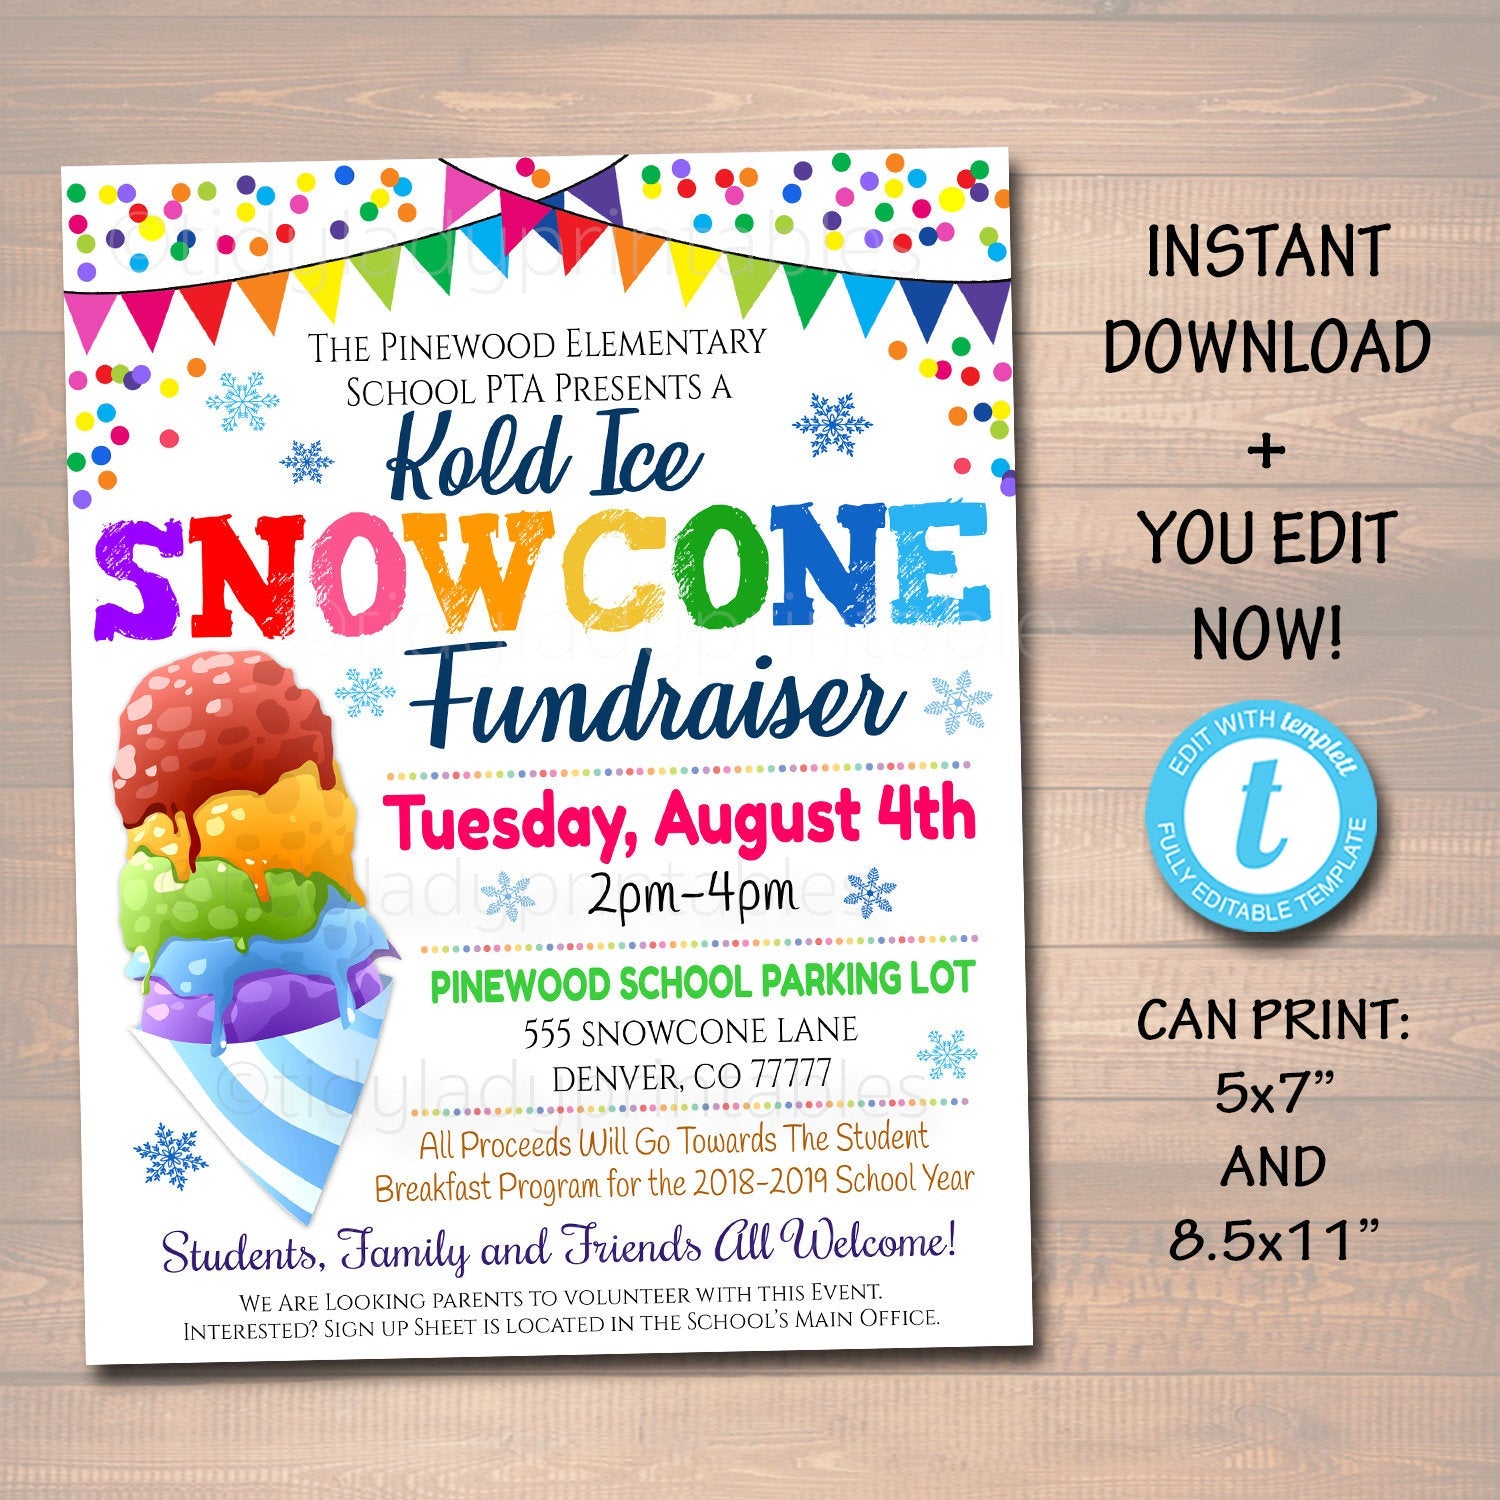 Snow Cone Fundraiser Event Flyer Editable Template TidyLady